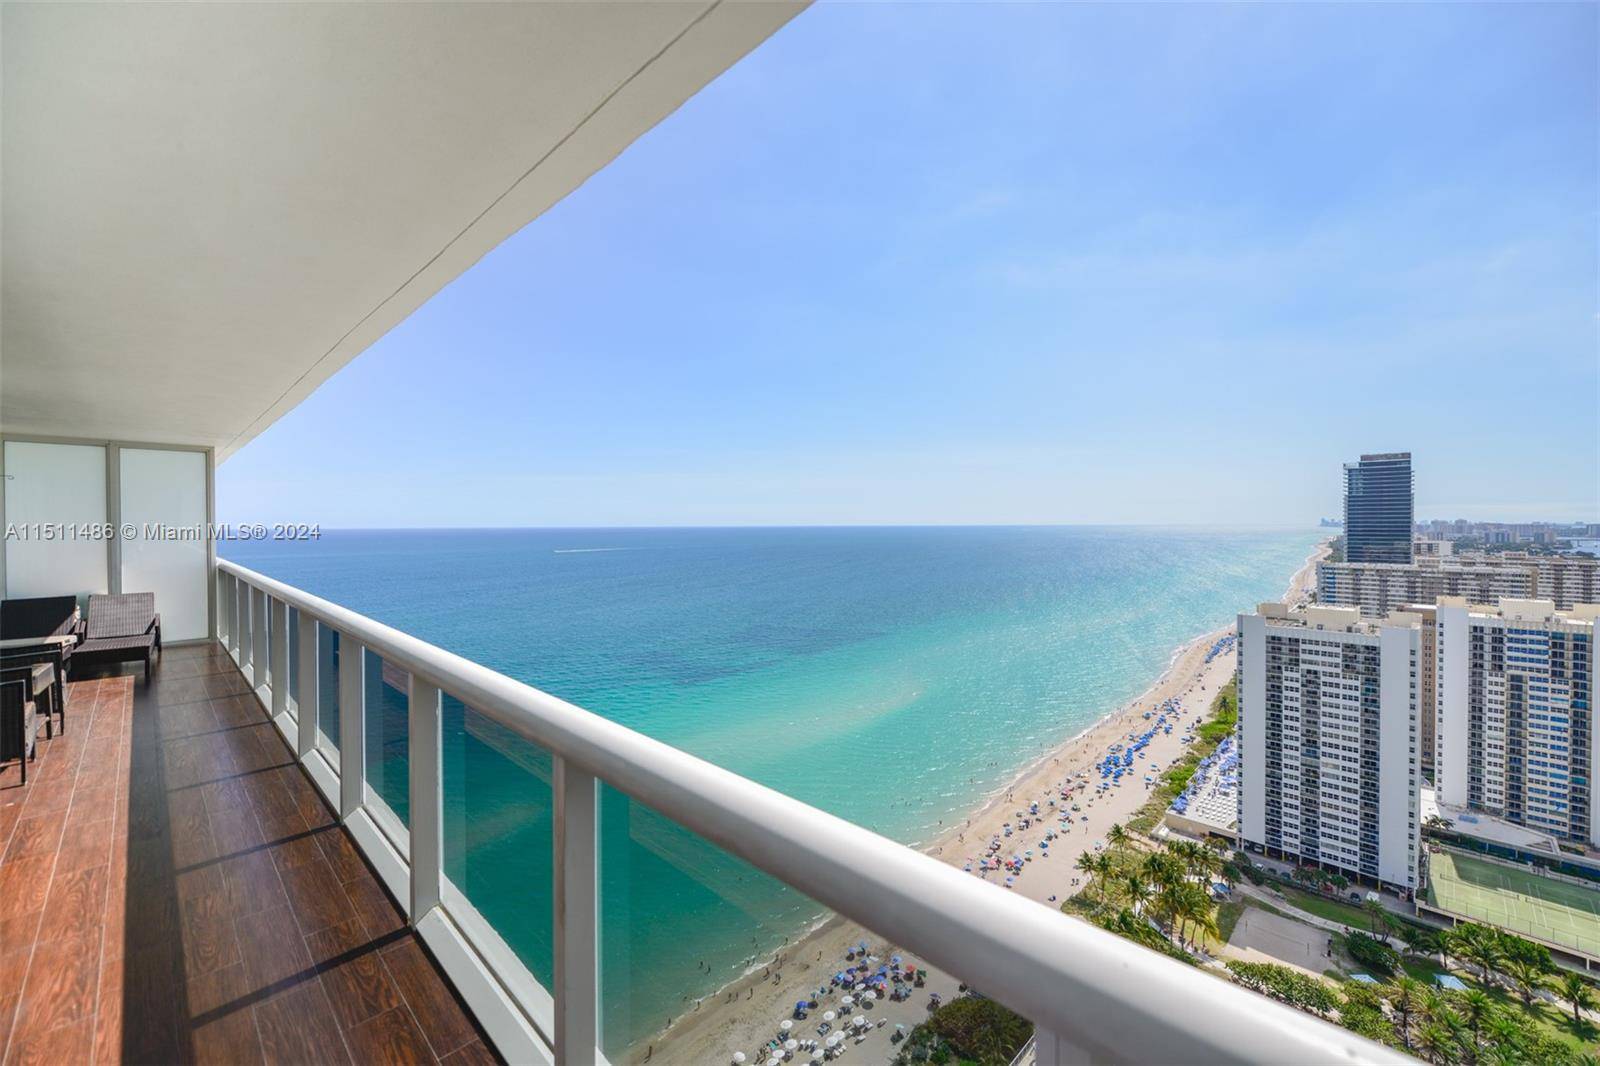 FULLY FURNISHED. THE MINUTE YOU WALK INTO THE APARTMENT YOU HAVE DIRECT SOUTH OCEAN VIEWS WHICH ARE SOME OF THE BEST IN ALL OF SOUTH FLORIDA.